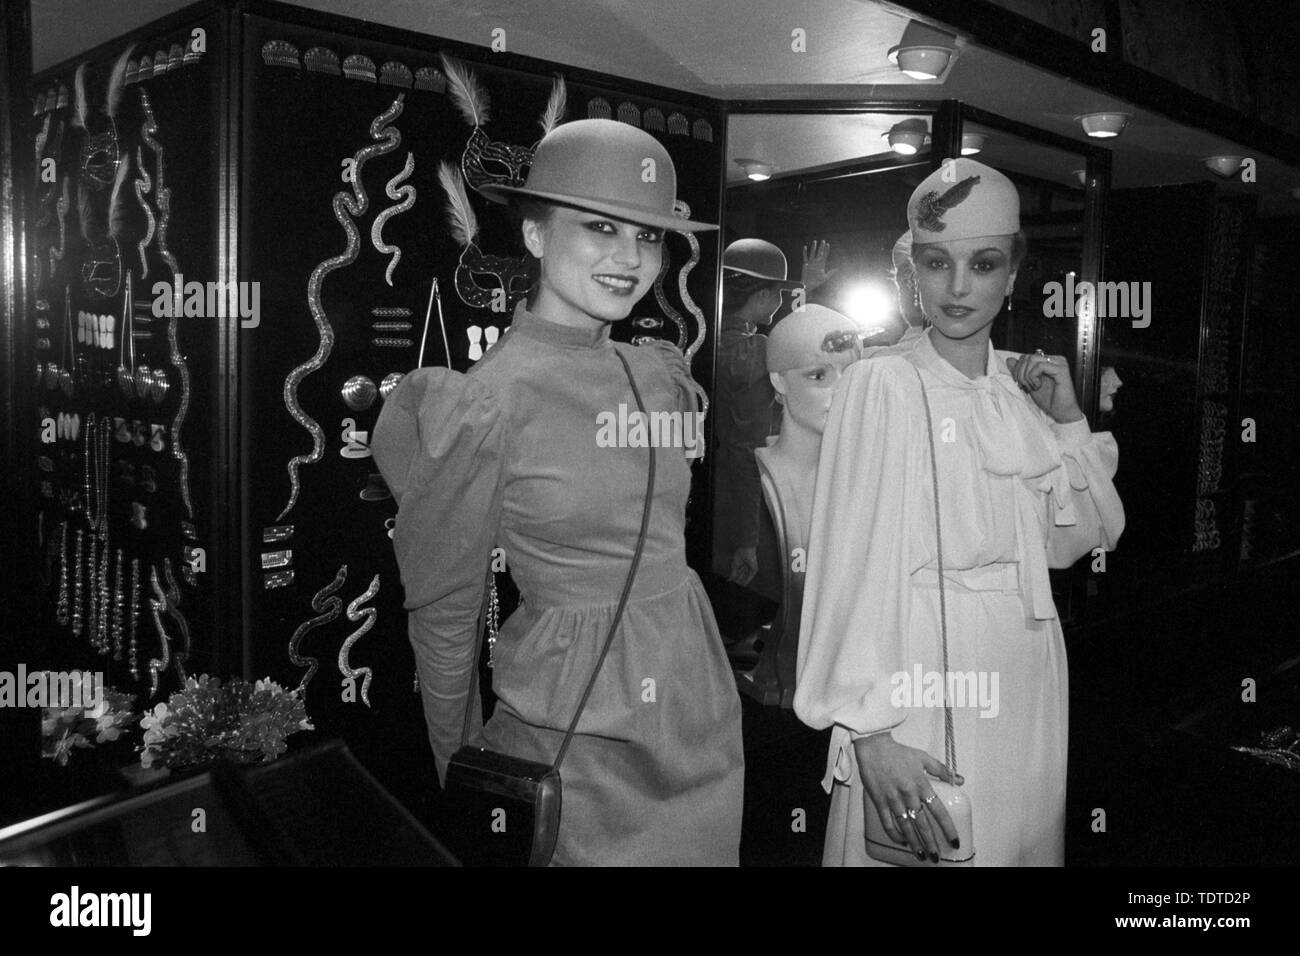 The model on the right wears a 1930s looking outfit and the model on the left also puts back the fashion clock to the leg-o'mutton sleeved era. Both women took part in the re-opening of the Biba store which reopened in new premises in London's Conduit Street. Stock Photo